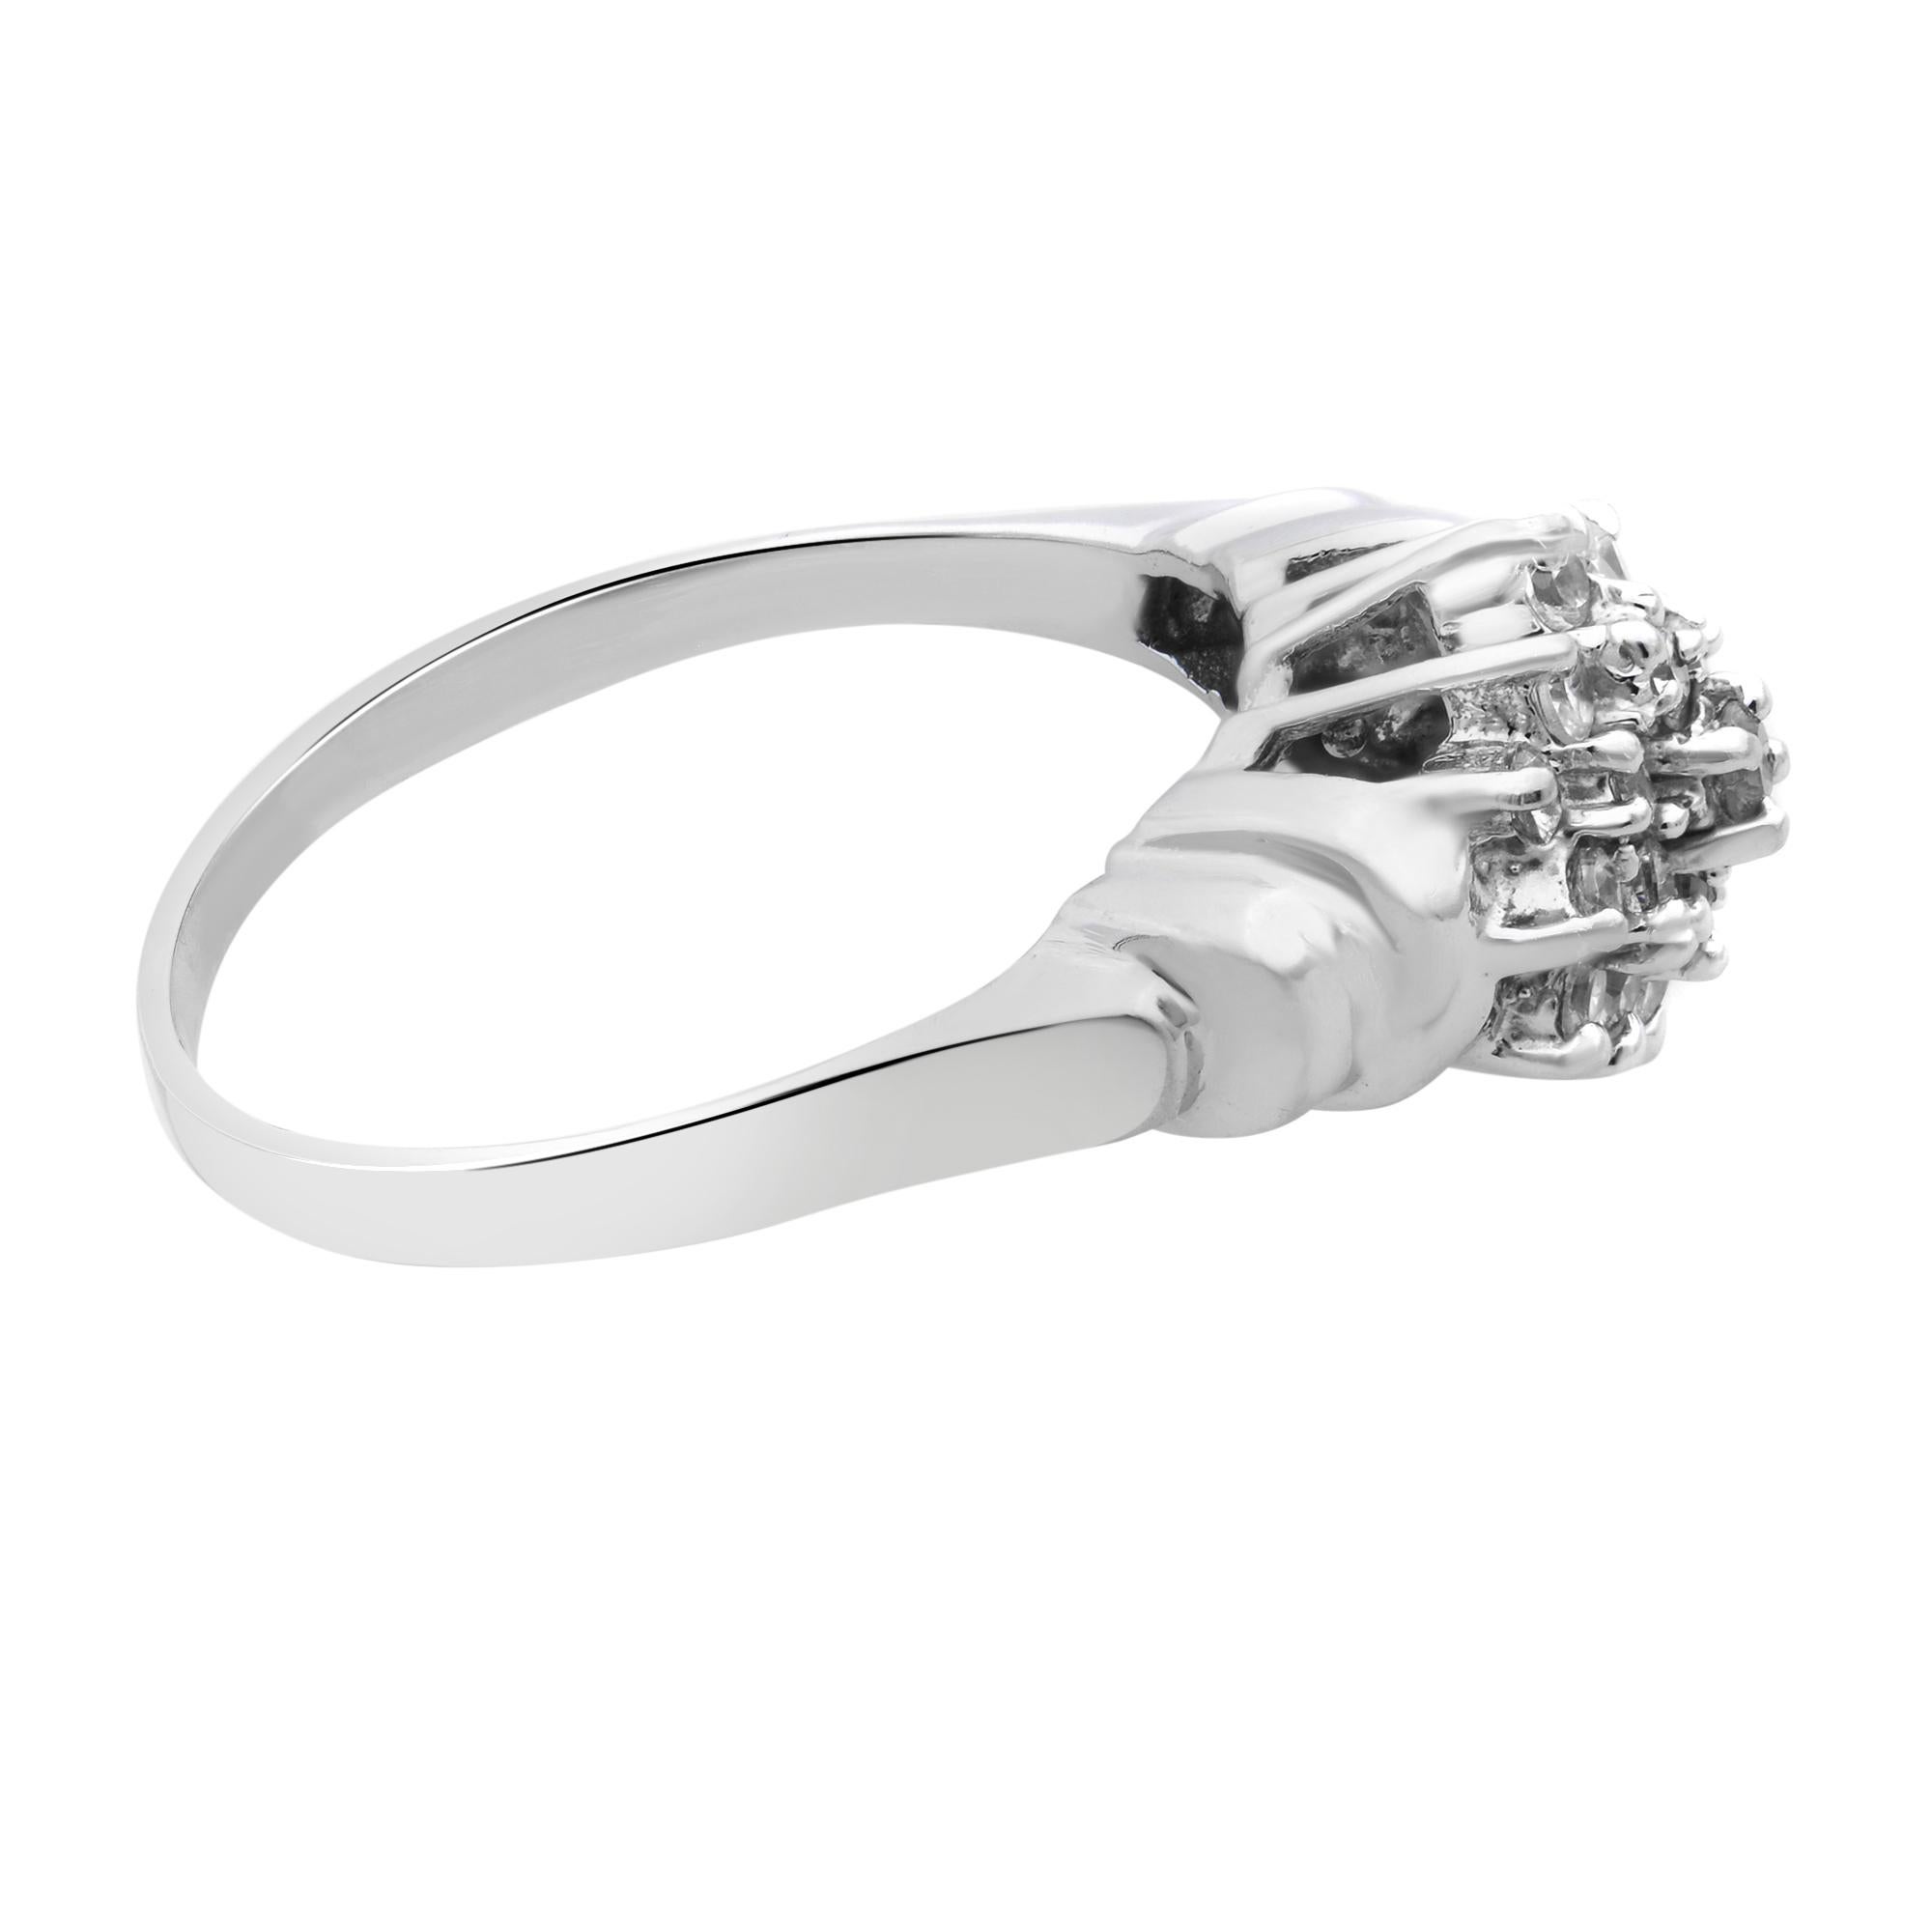 Rachel Koen Diamond Ladies Cocktail Ring 14K White Gold 0.25cttw In New Condition For Sale In New York, NY